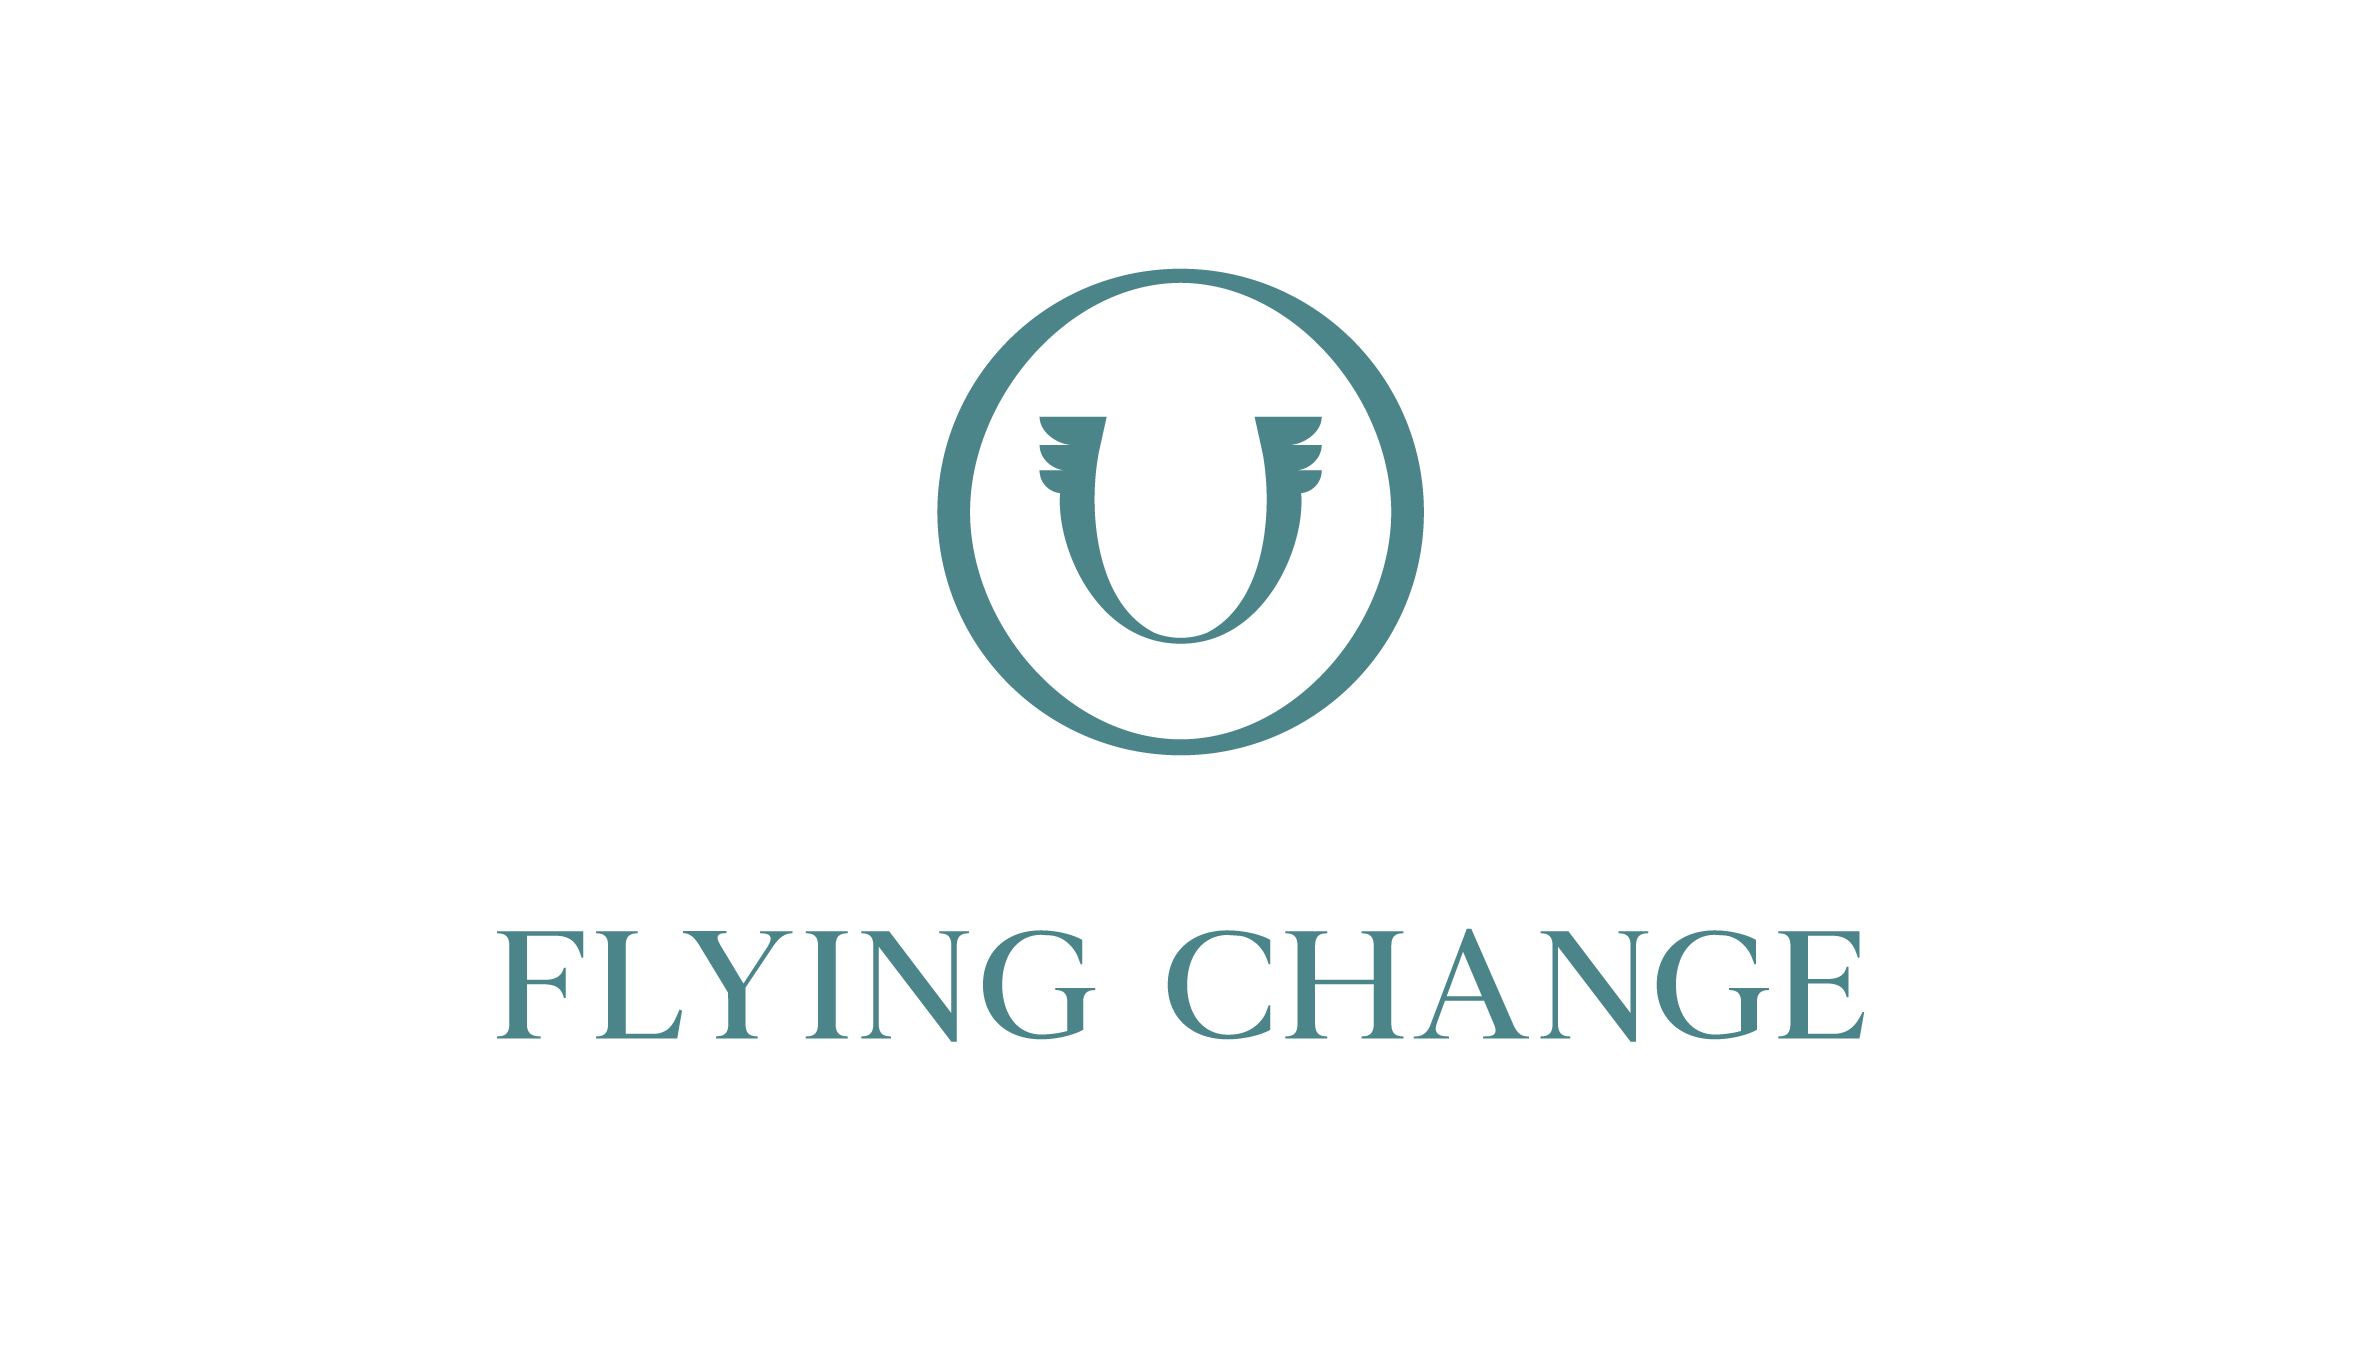 Flying Change Services